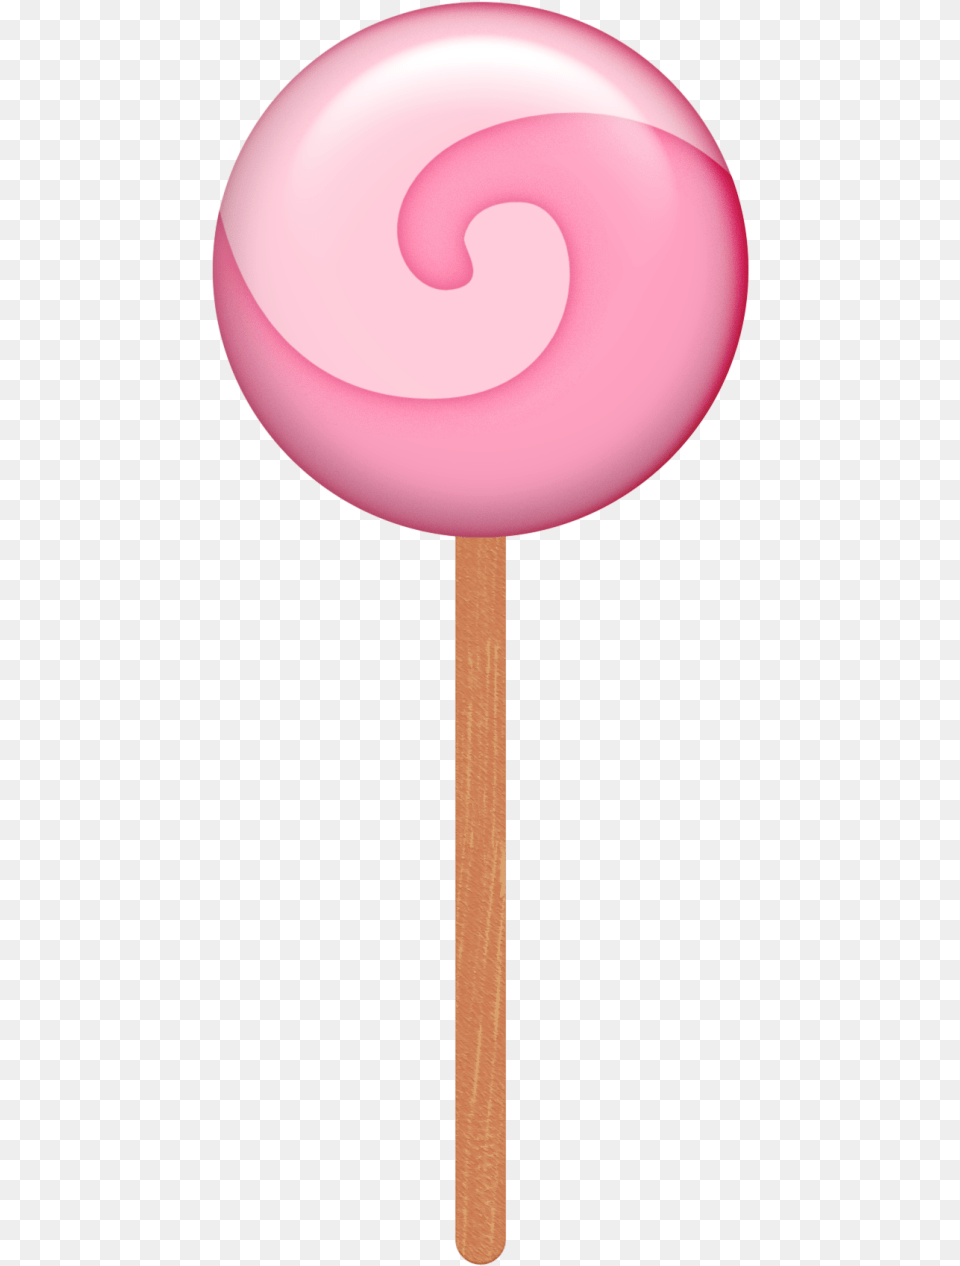 Aw Coc Lollipop Candy Suckers Transparent Background, Food, Sweets, Lamp Png Image